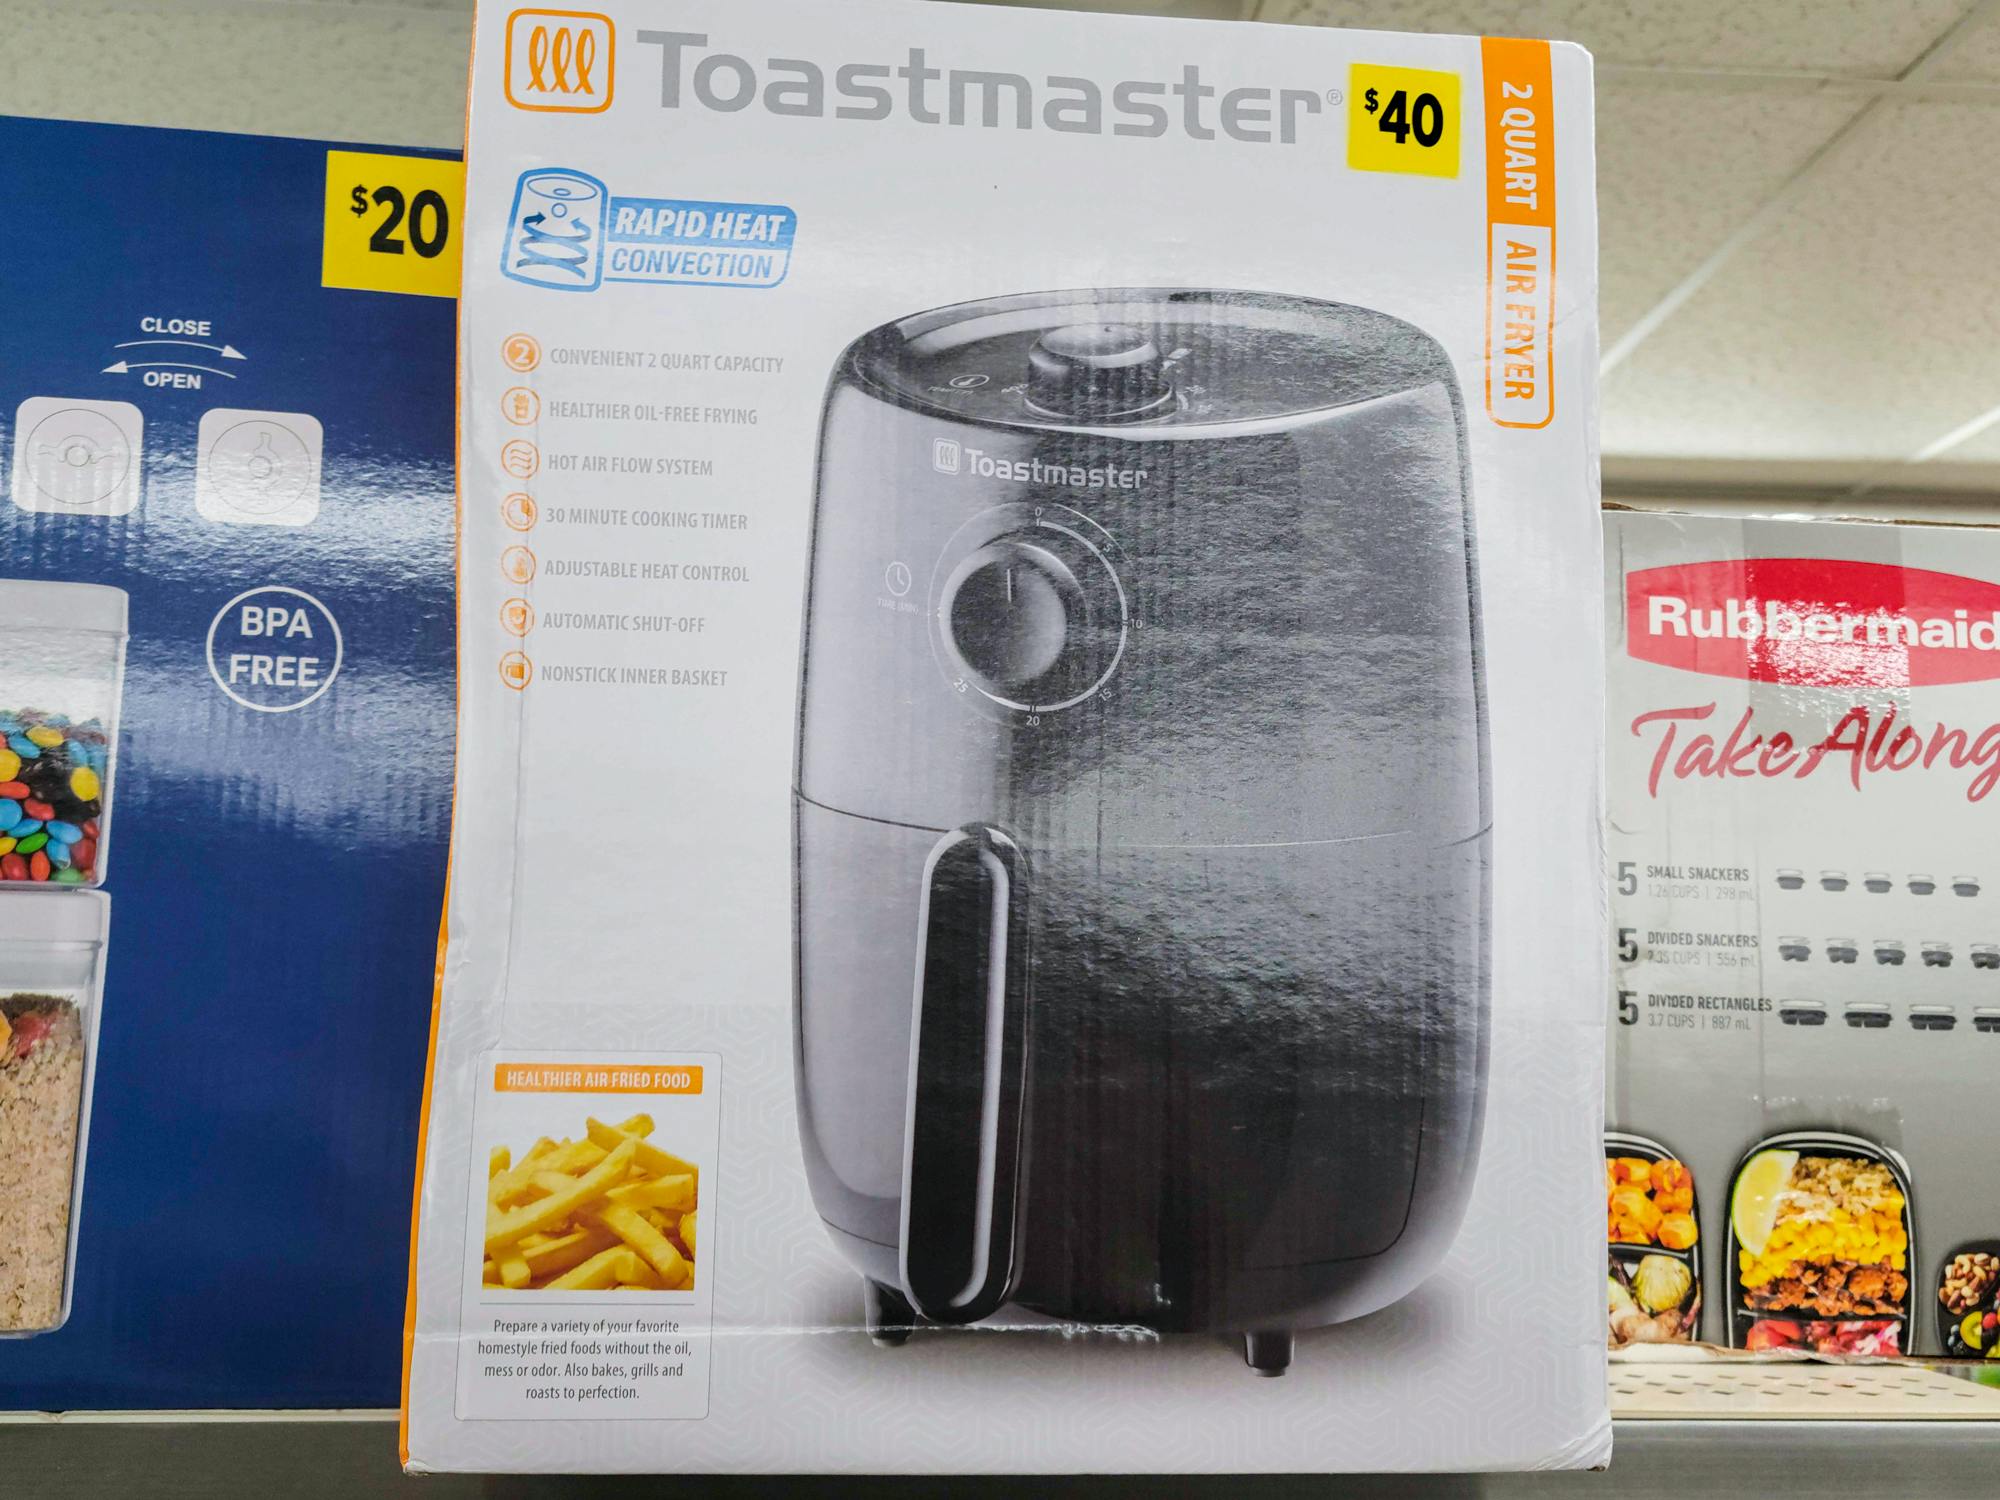 toast master on a shelf with a yellow clearance tag